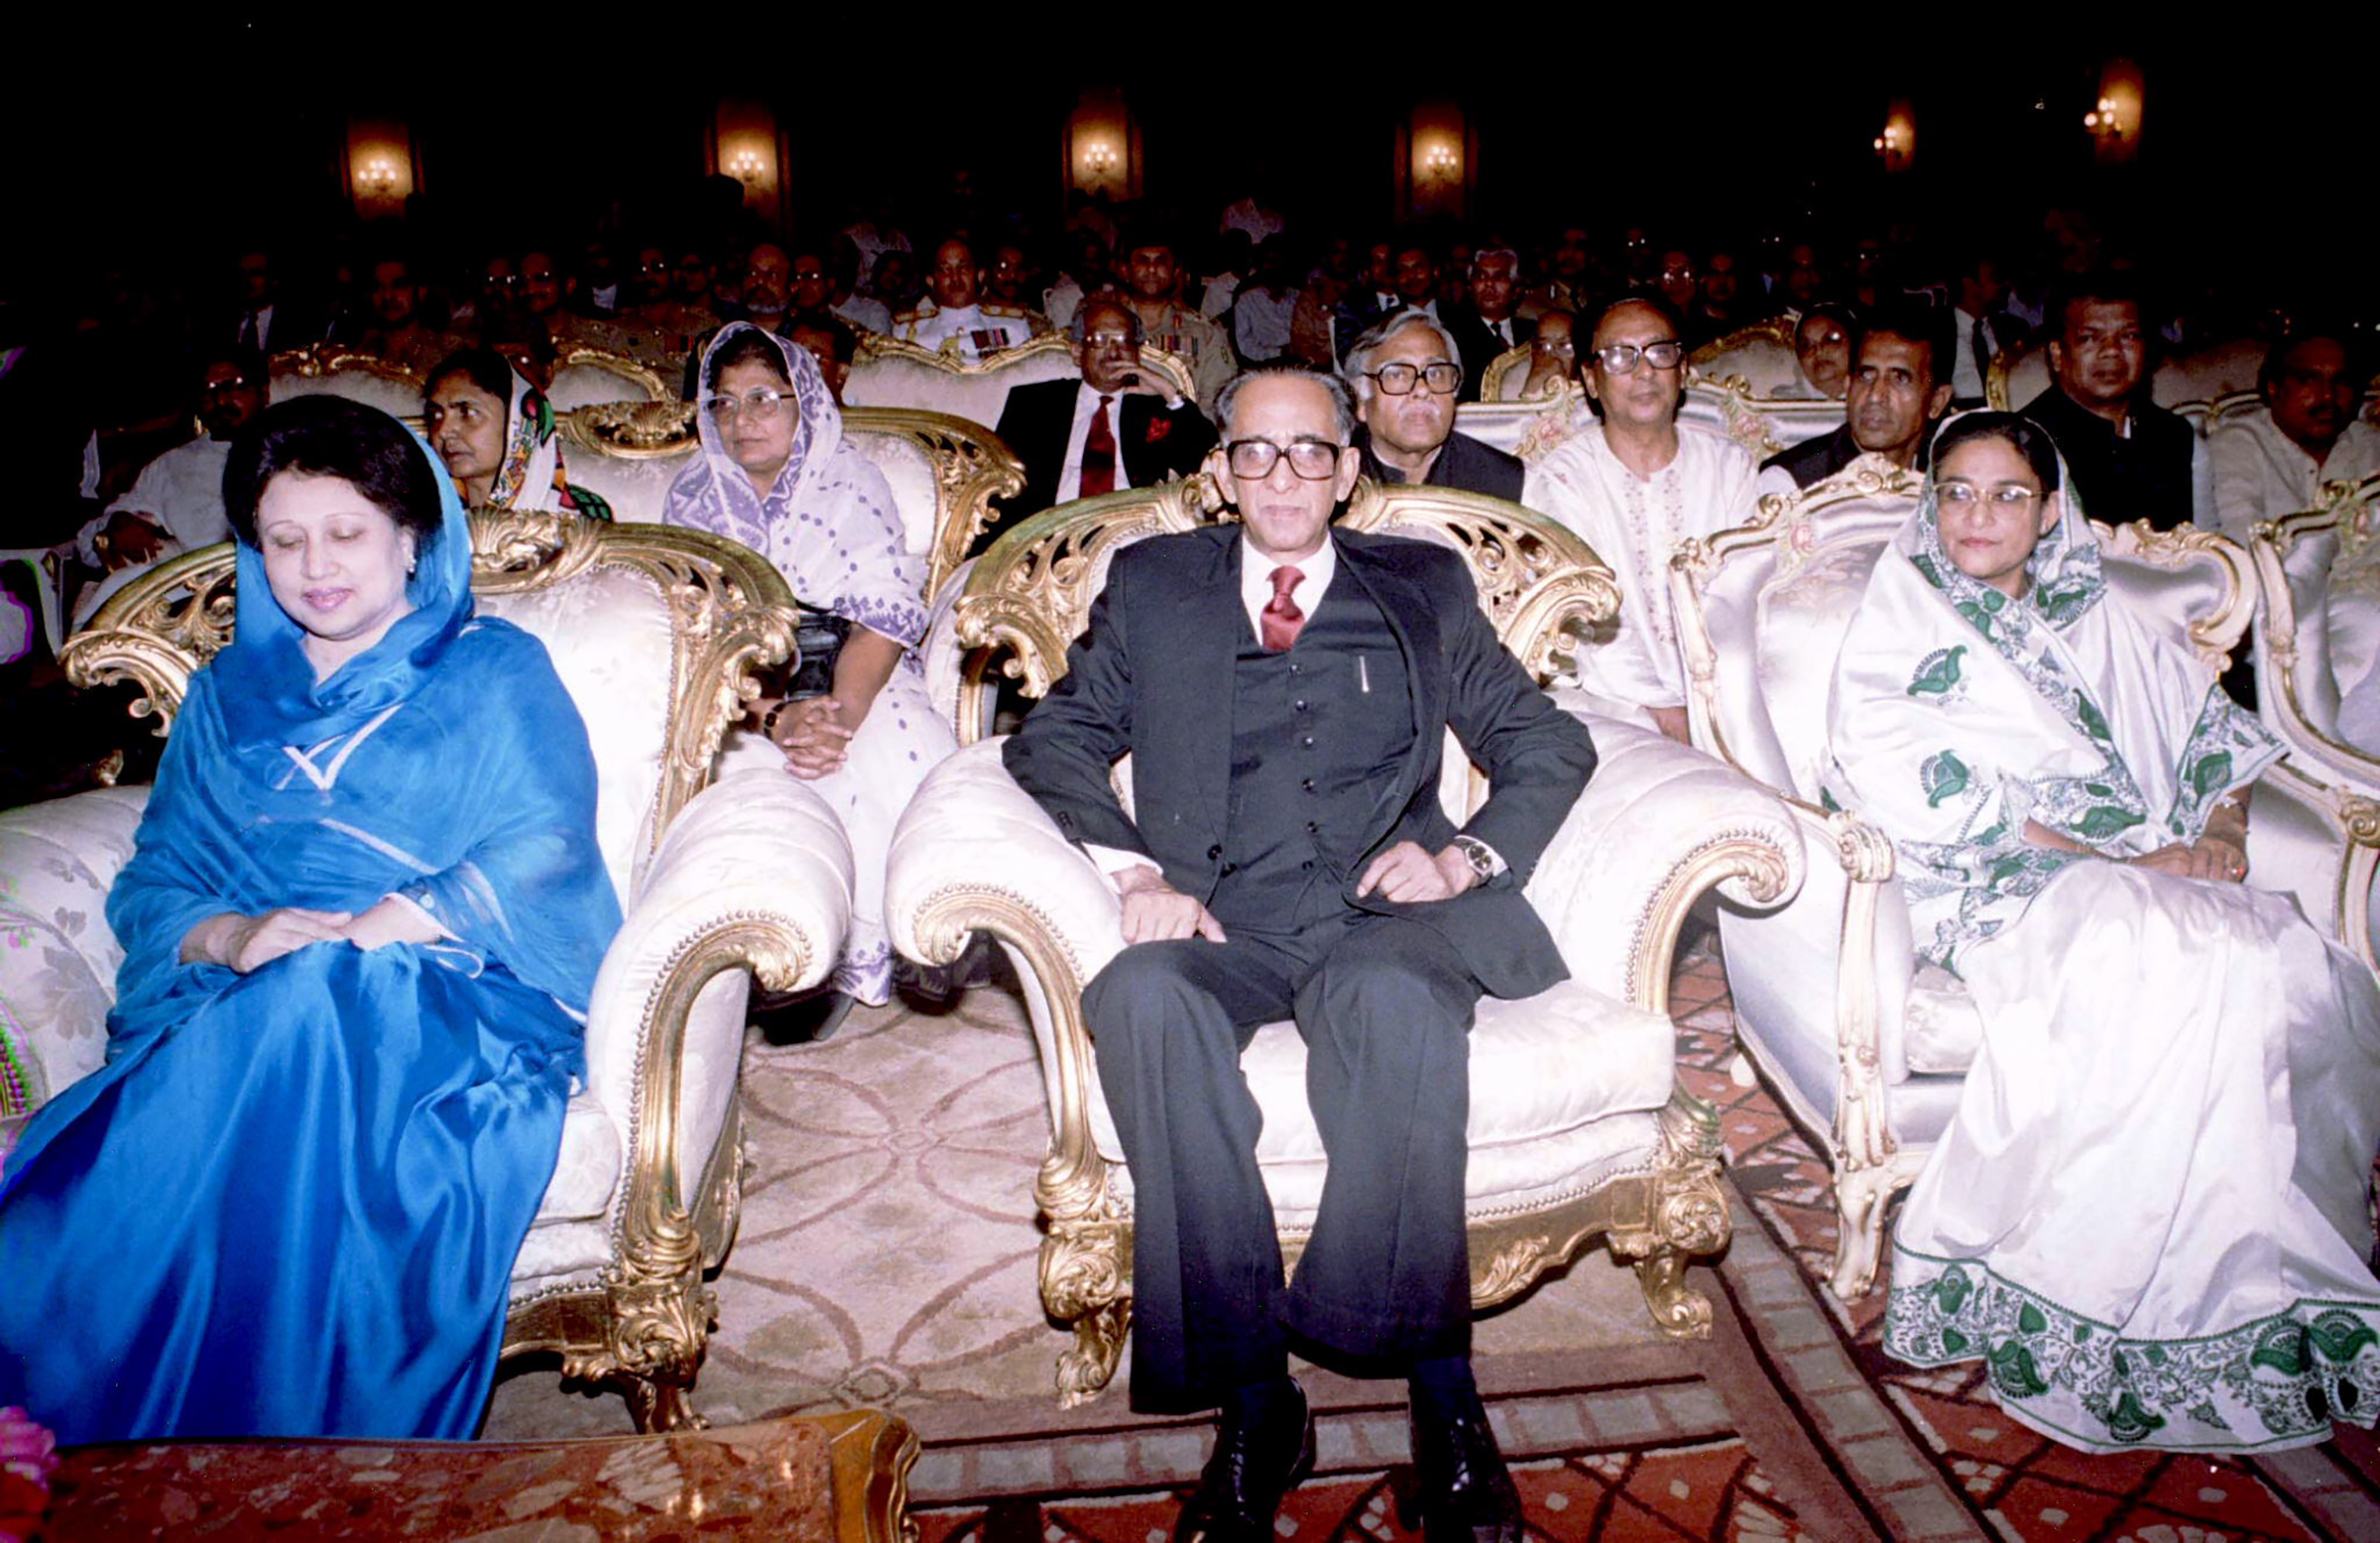 Bangladesh's then newly appointed caretaker government head ex-Chief Justice Habibur Rahman, center, is flanked by outgoing prime Minister Khaleda Zia, left, and then opposition leader Sheikh Hasina, right at the swearing-in for Rahman at the presidential palace on March 30. Rahman has been appointed as chief of the interim administration to oversee general elections expected in May or June.